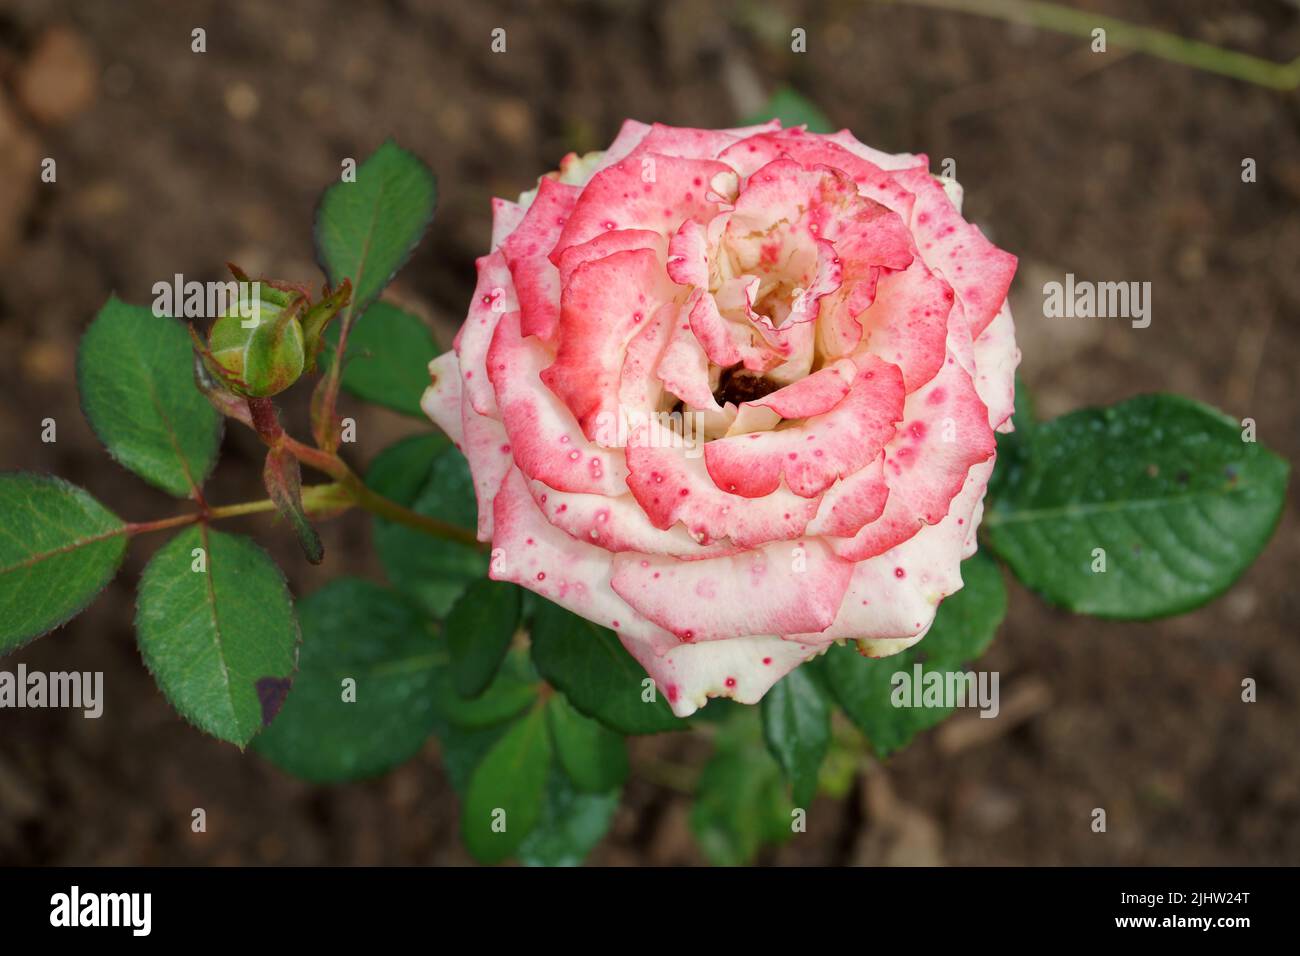 A beautiful blooming rose flower in a close-up view. The white to red hue rose speckled petals with pink dots. Botrytis cinerea (fungus) is likely the Stock Photo